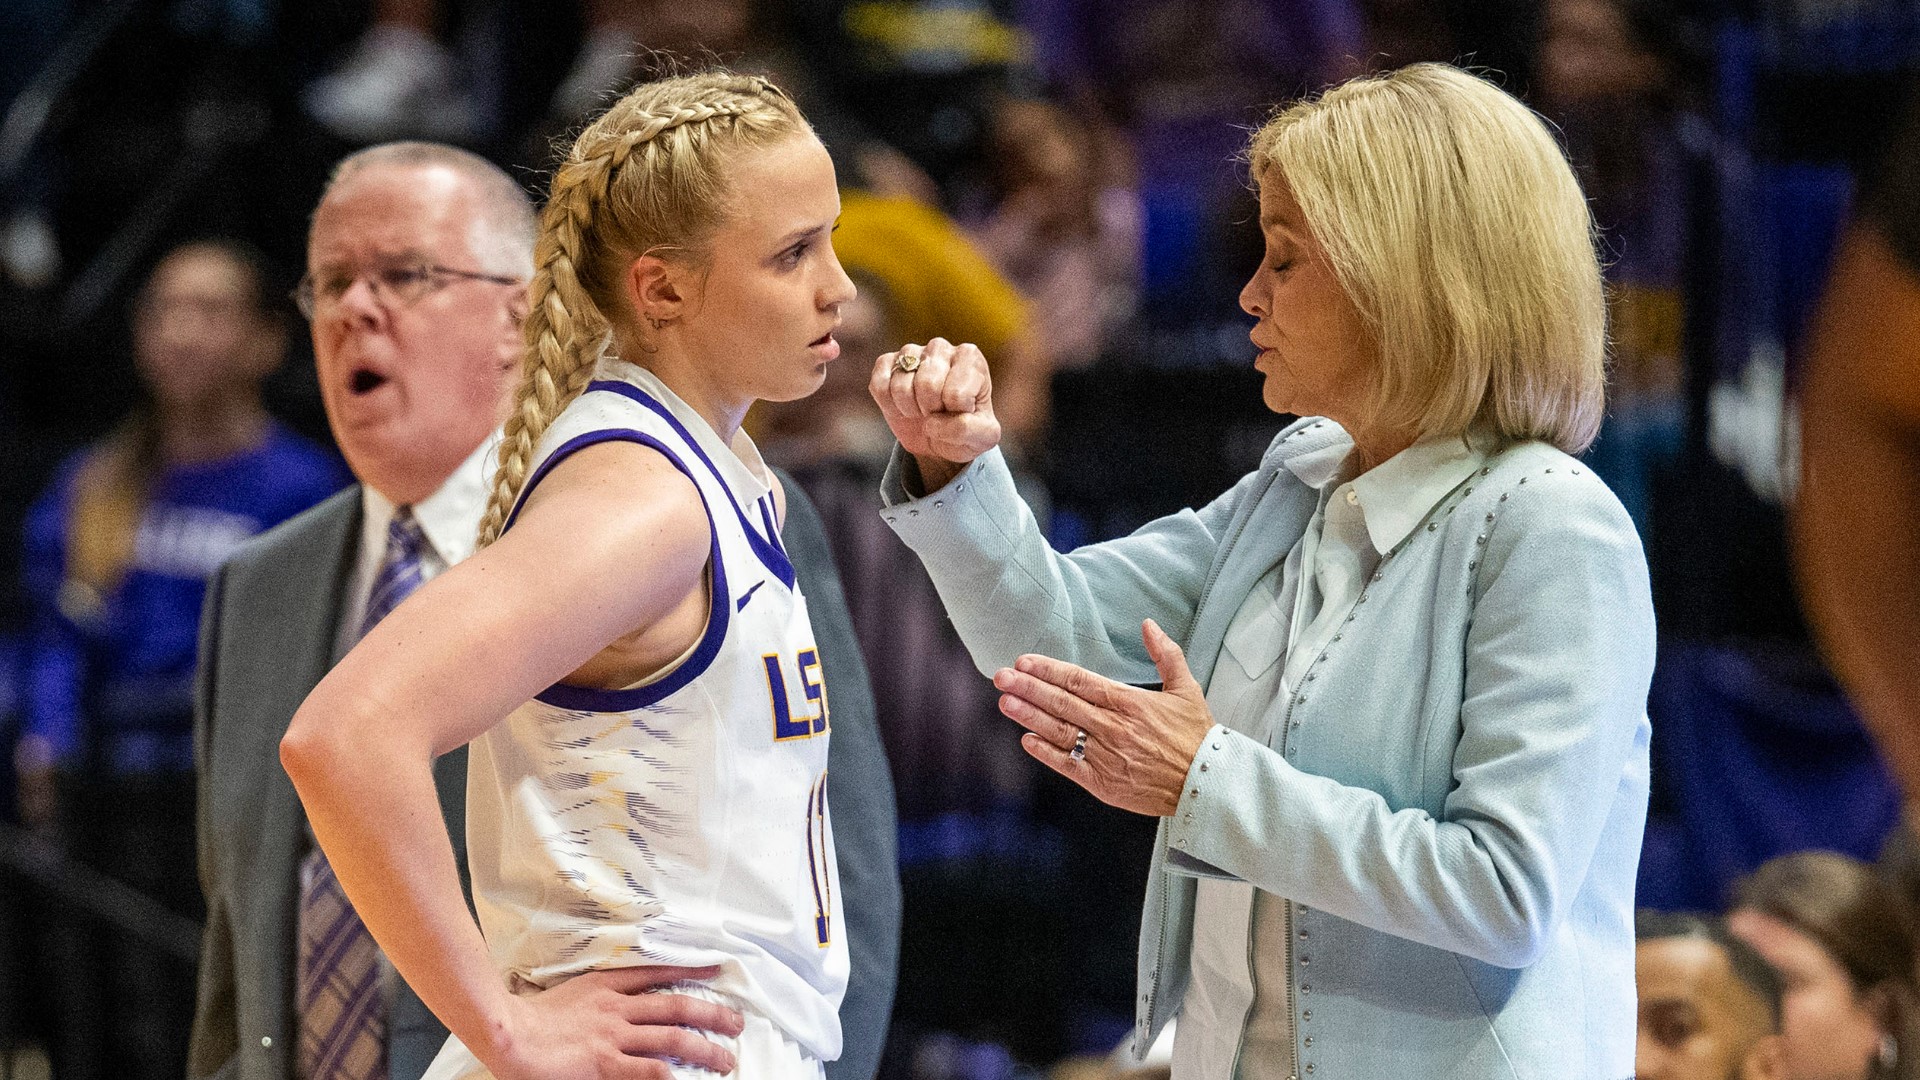 LSU guard Hailey Van Lith said calling them dirty debutantes has nothing to do with sports.